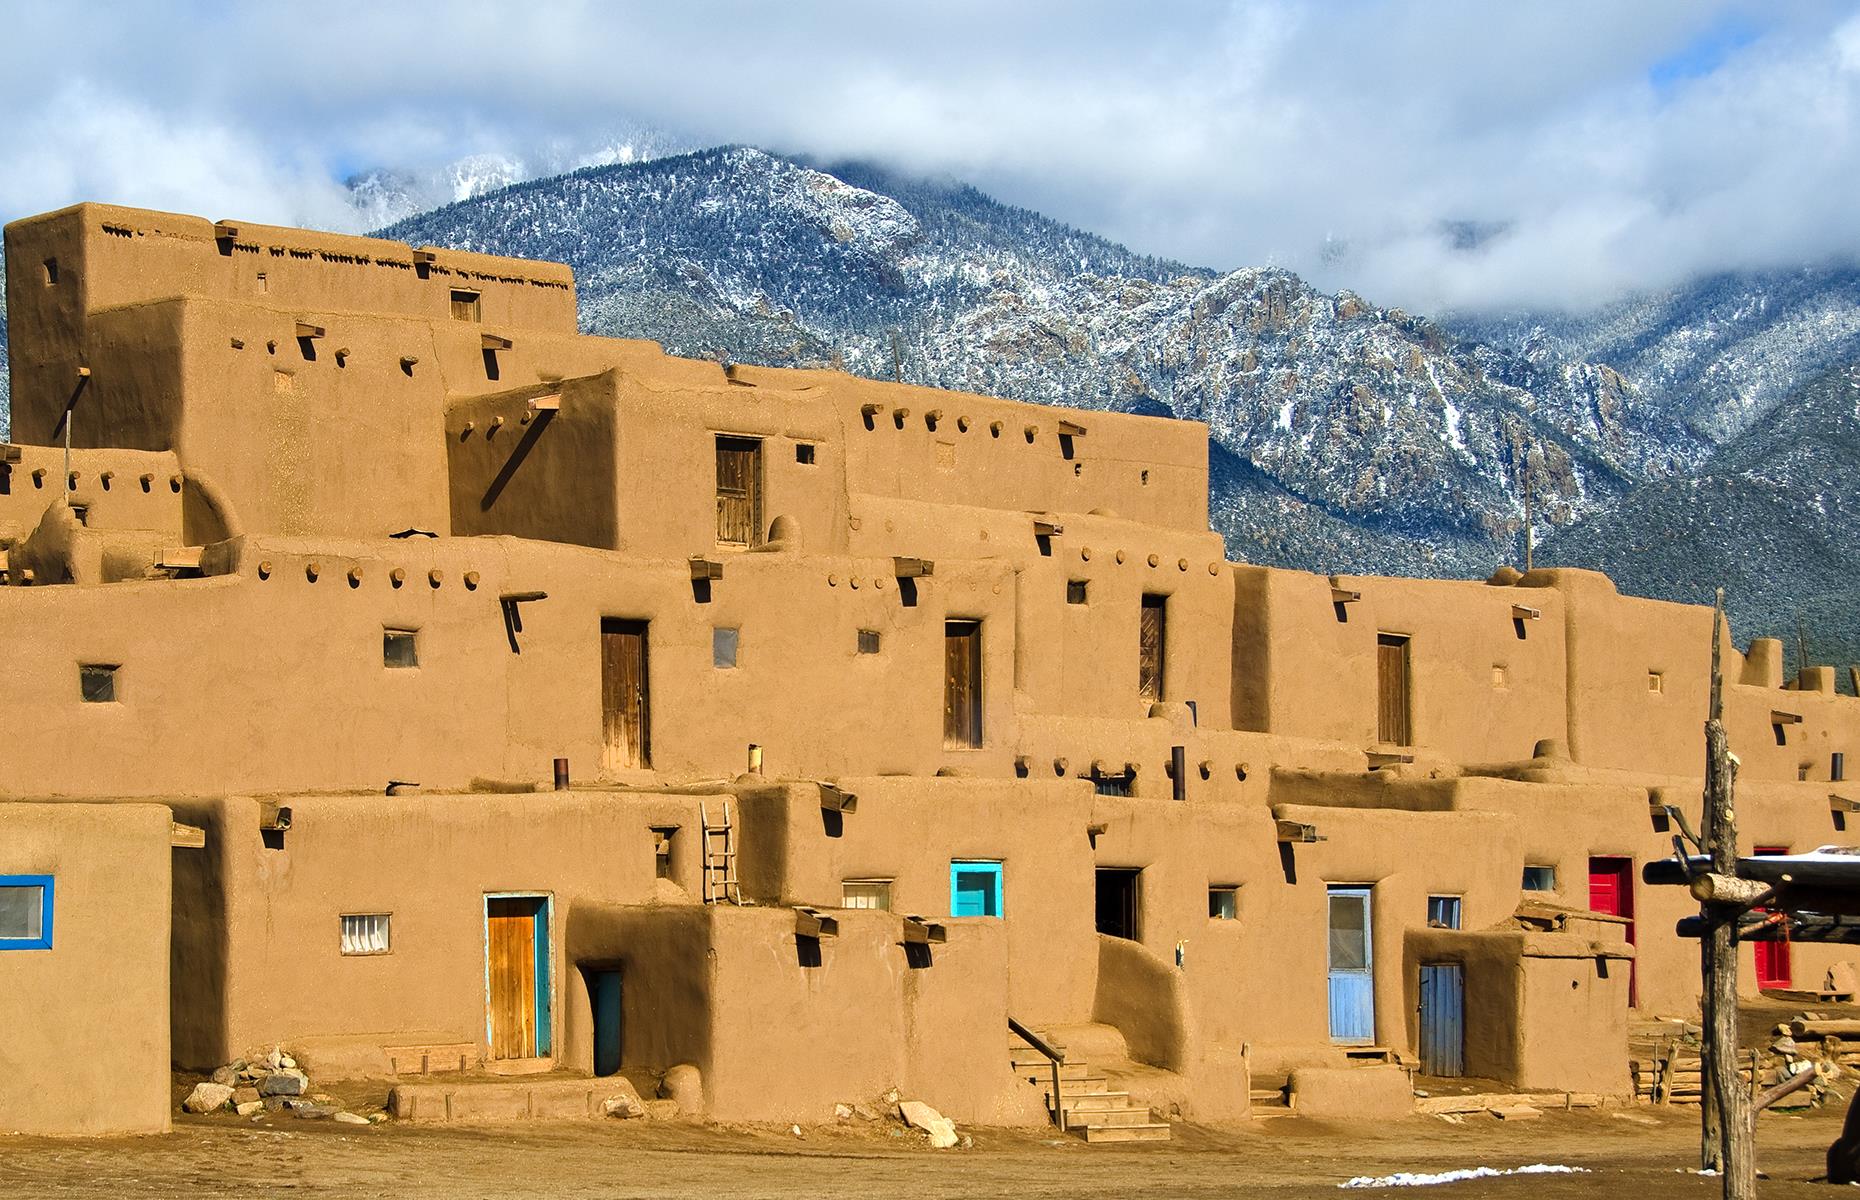 <p>A UNESCO World Heritage Site and National Historic Landmark, Taos Pueblo is a Puebloan settlement in northern New Mexico that's survived since the 13th century. Made from adobe – a construction material made from earth, water and straw – the unique settlement is still maintained by local people, resulting in one of the most well-preserved examples of Indigenous architecture not only in America, but in the world. Free guided tours take visitors to the most significant areas of the village, helping them to appreciate this incredible settlement through historic tales and interesting titbits.</p>